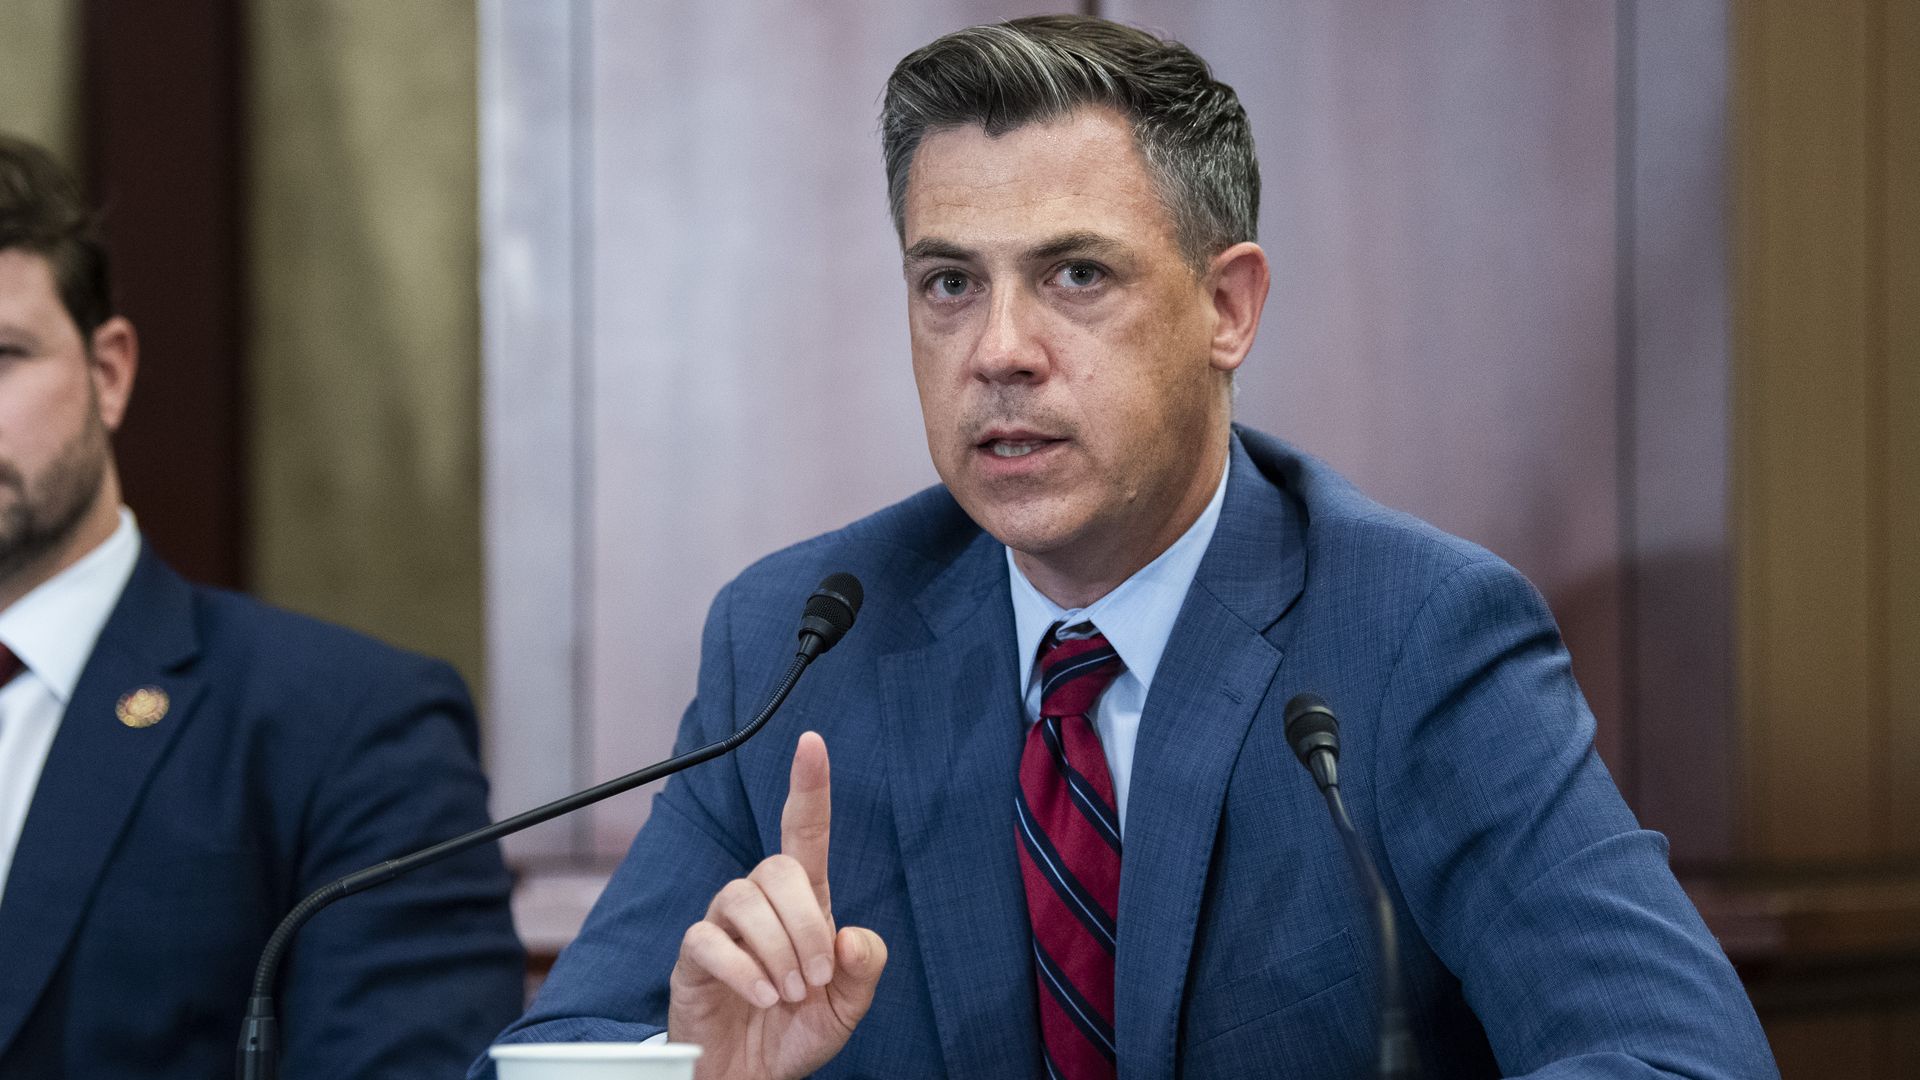  Rep. Jim Banks, R-Ind., makes remarks during a roundtable discussion with House Republican ranking members and veterans 